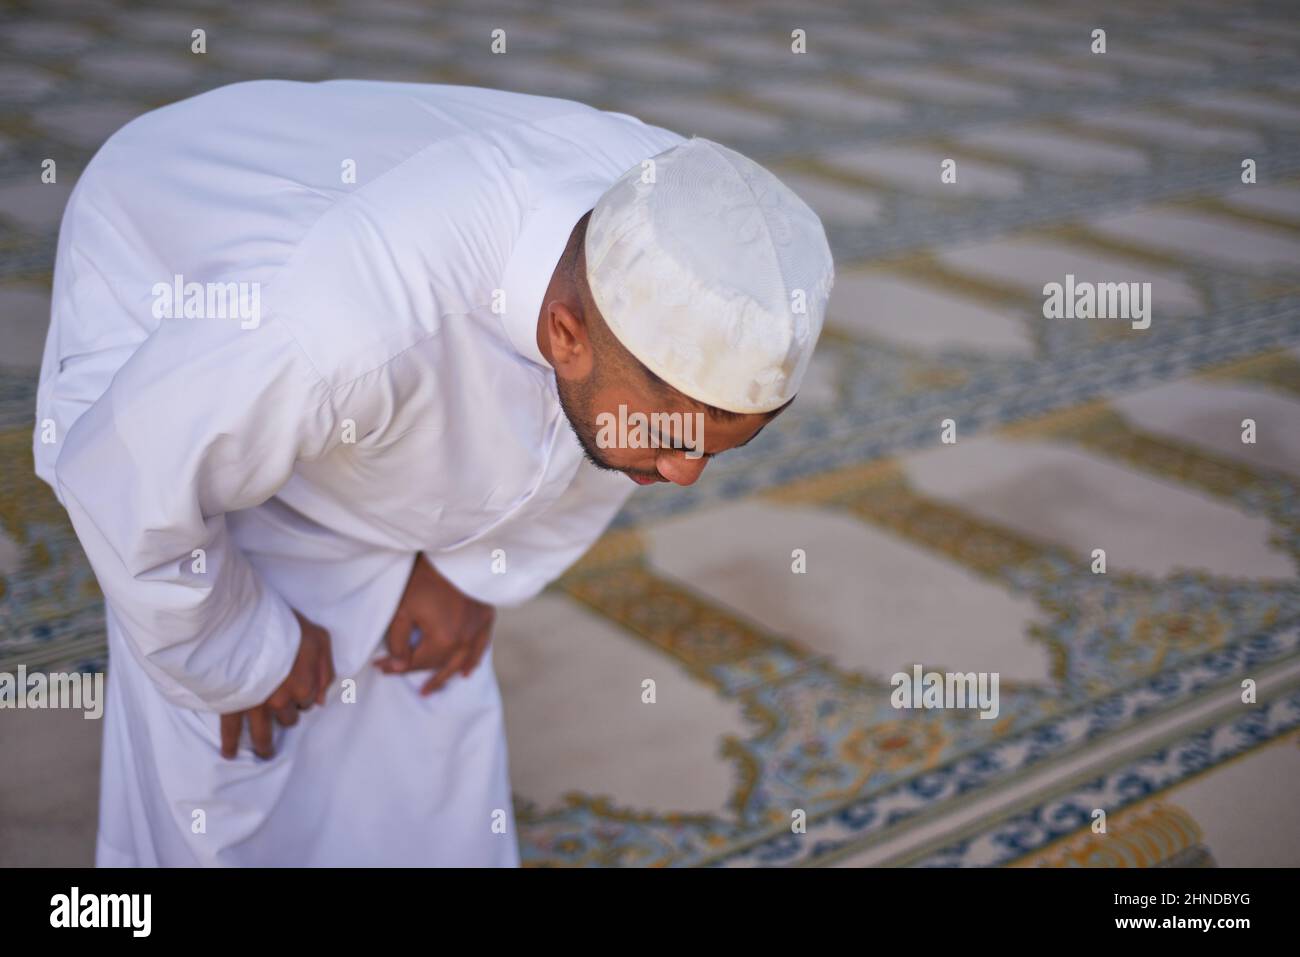 An overhead view of a young Muslim man bowing during prayers at a mosque Stock Photo